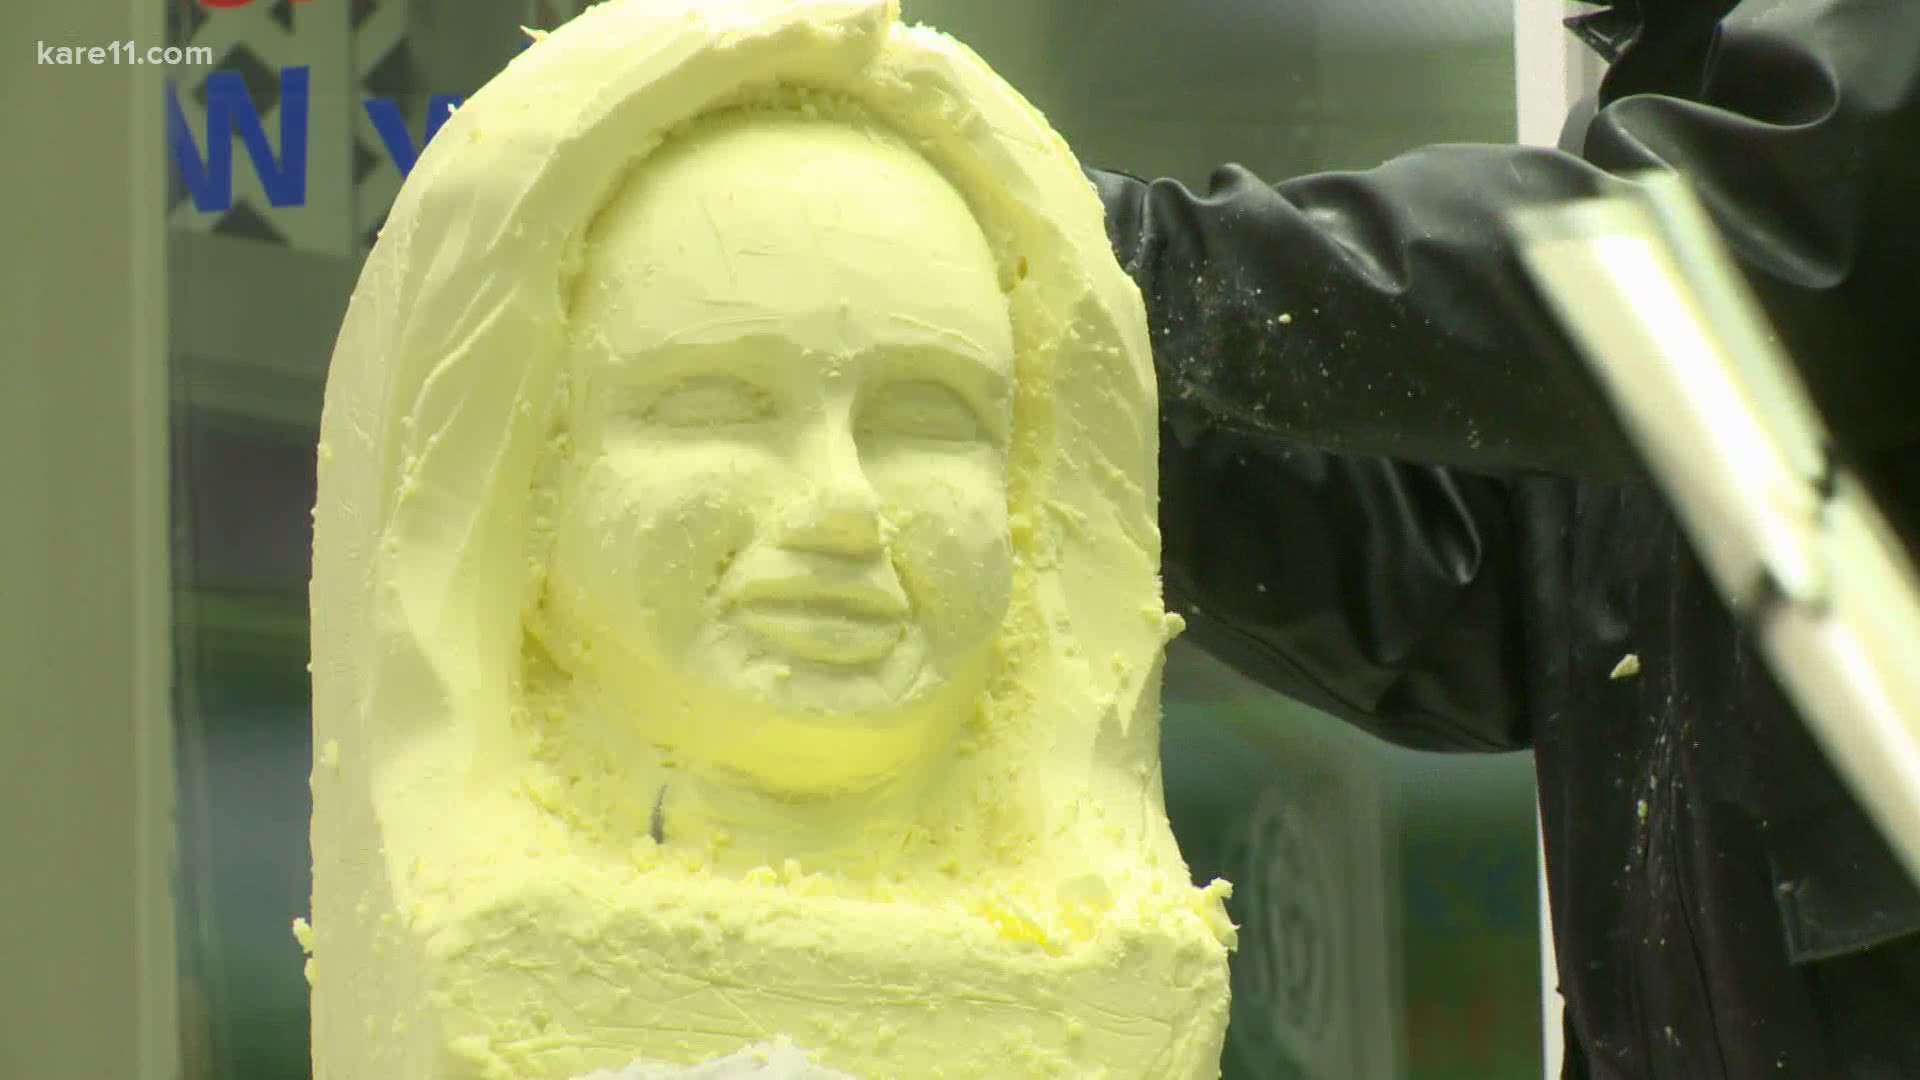 The State Fair continues the iconic tradition of carving butter sculptures of Princess Kay of the Milky Way and her court